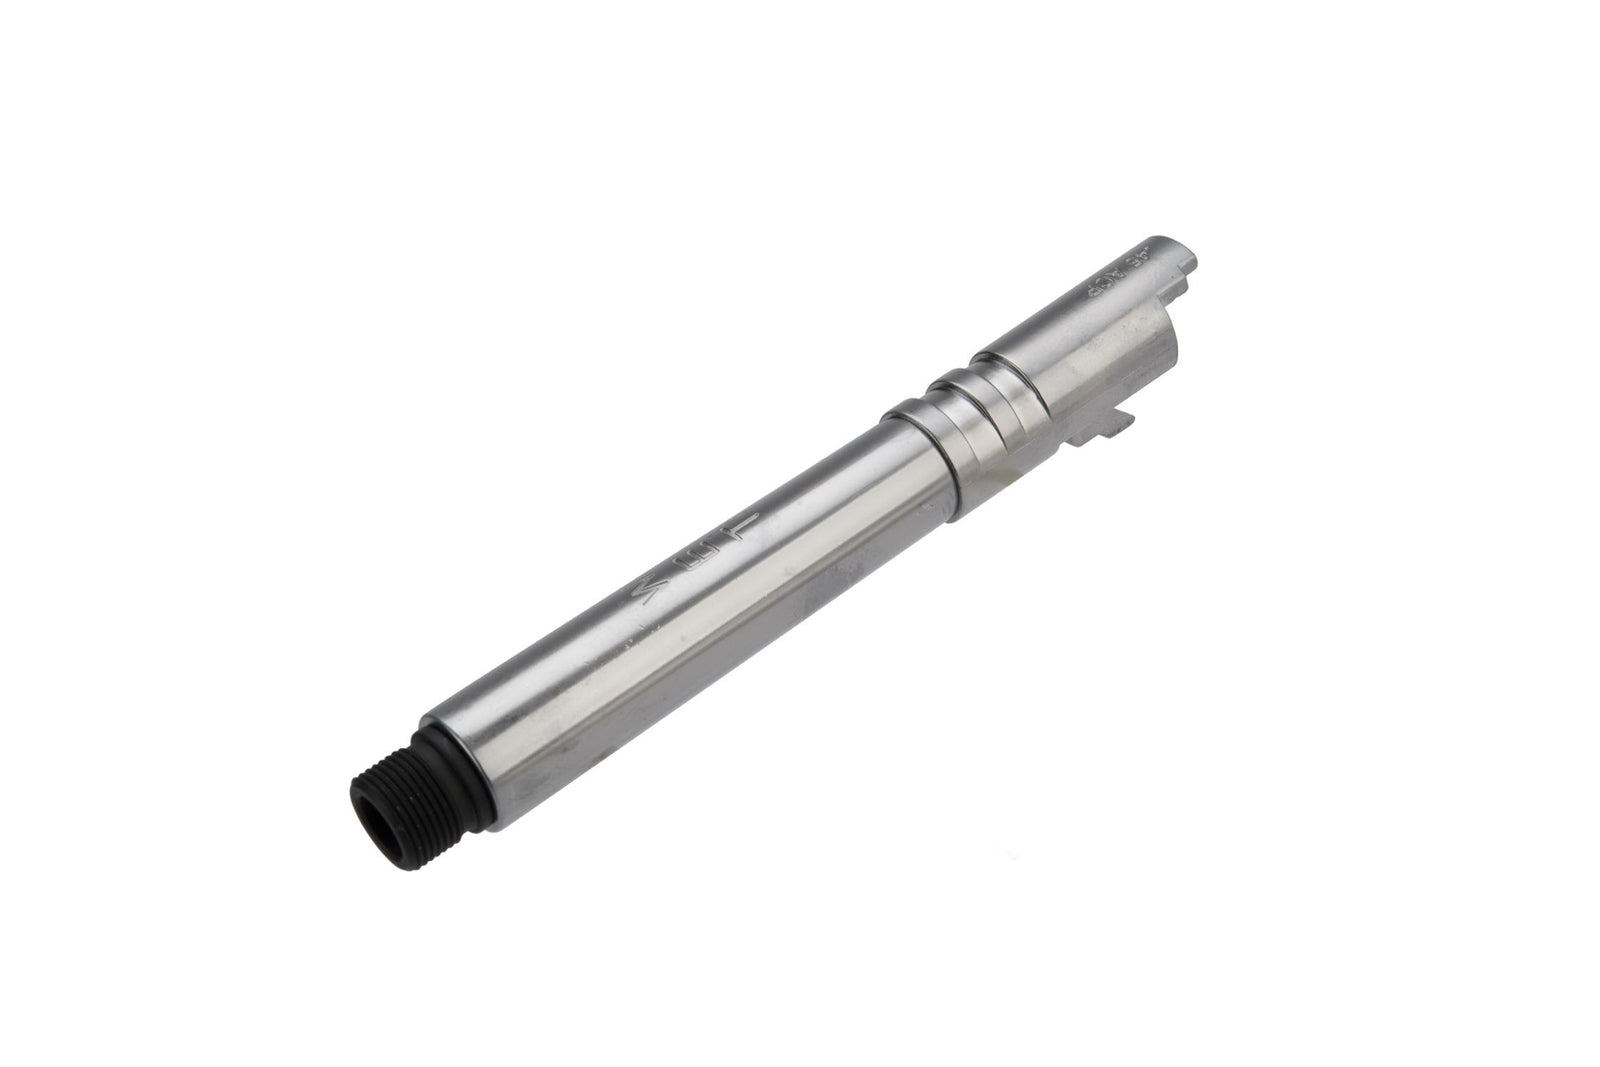 WE-Tech Steel Alloy Threaded Outer Barrel for 5.1 Hi-CAPA Series Airsoft GBB Pistols (Finish: Chrome)